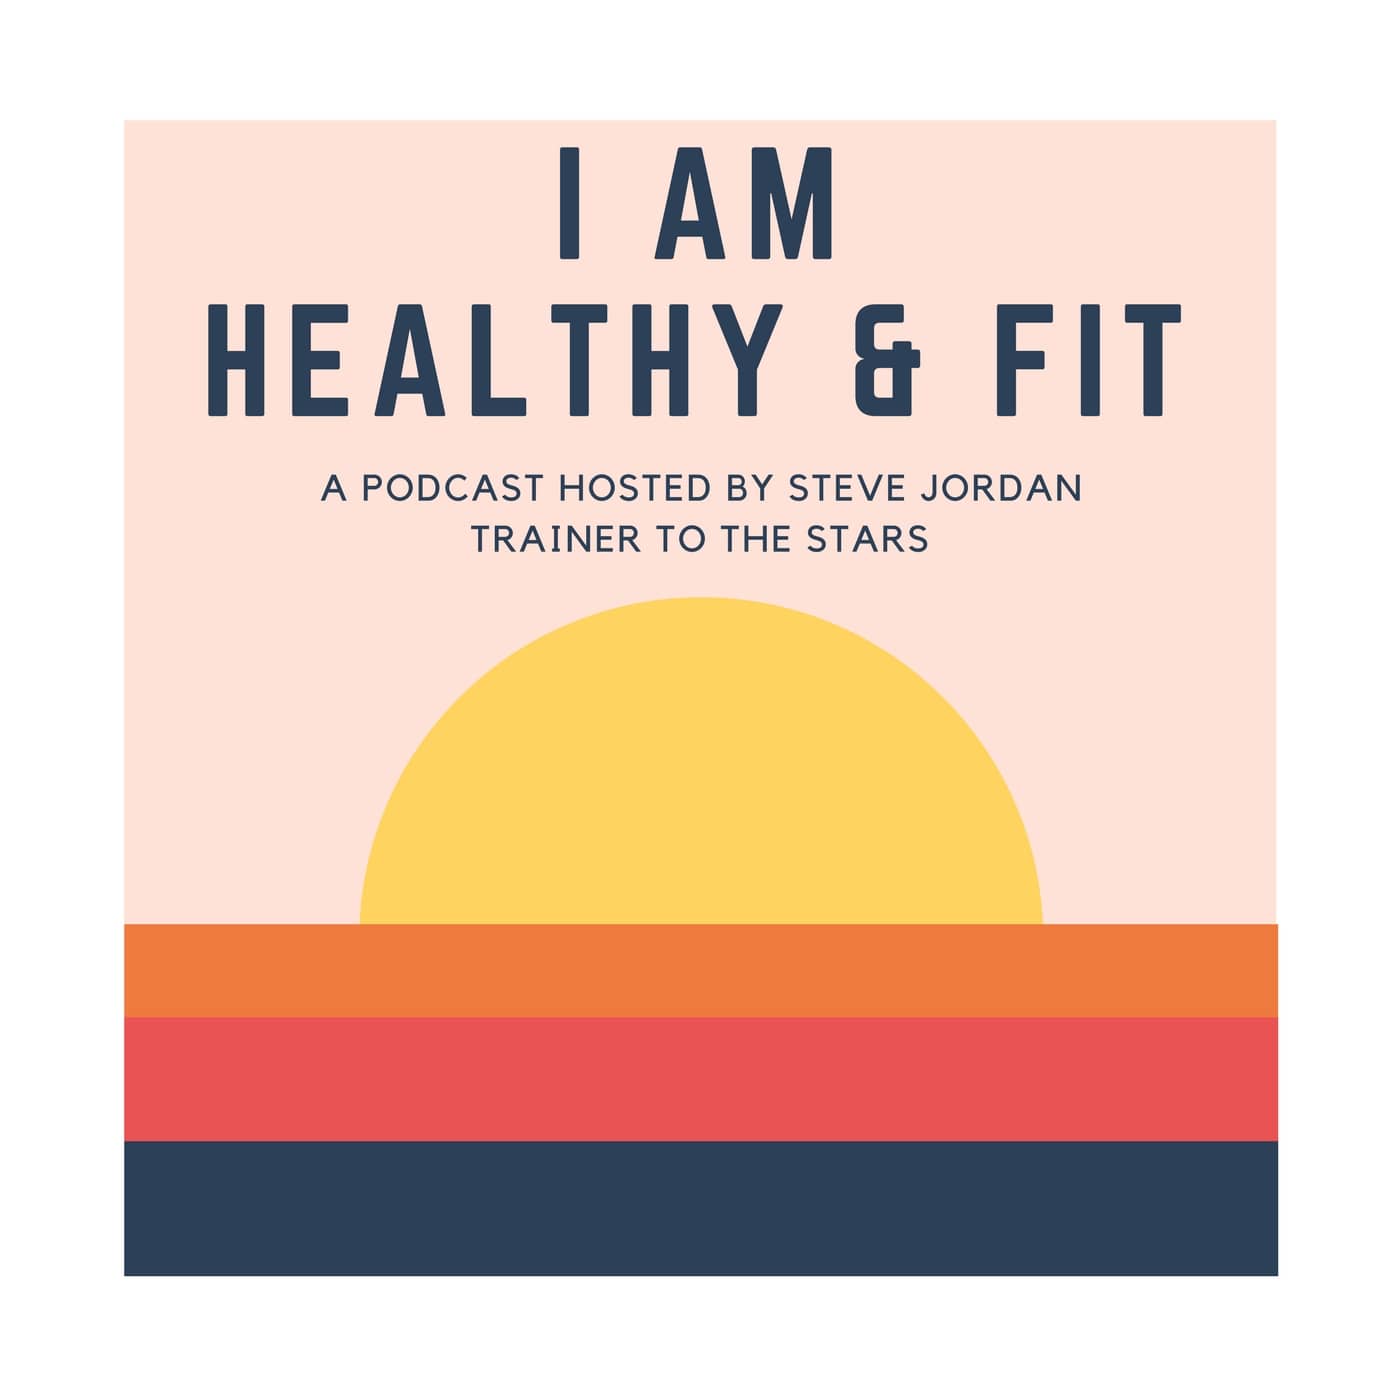 I AM Healthy and Fit Podcast